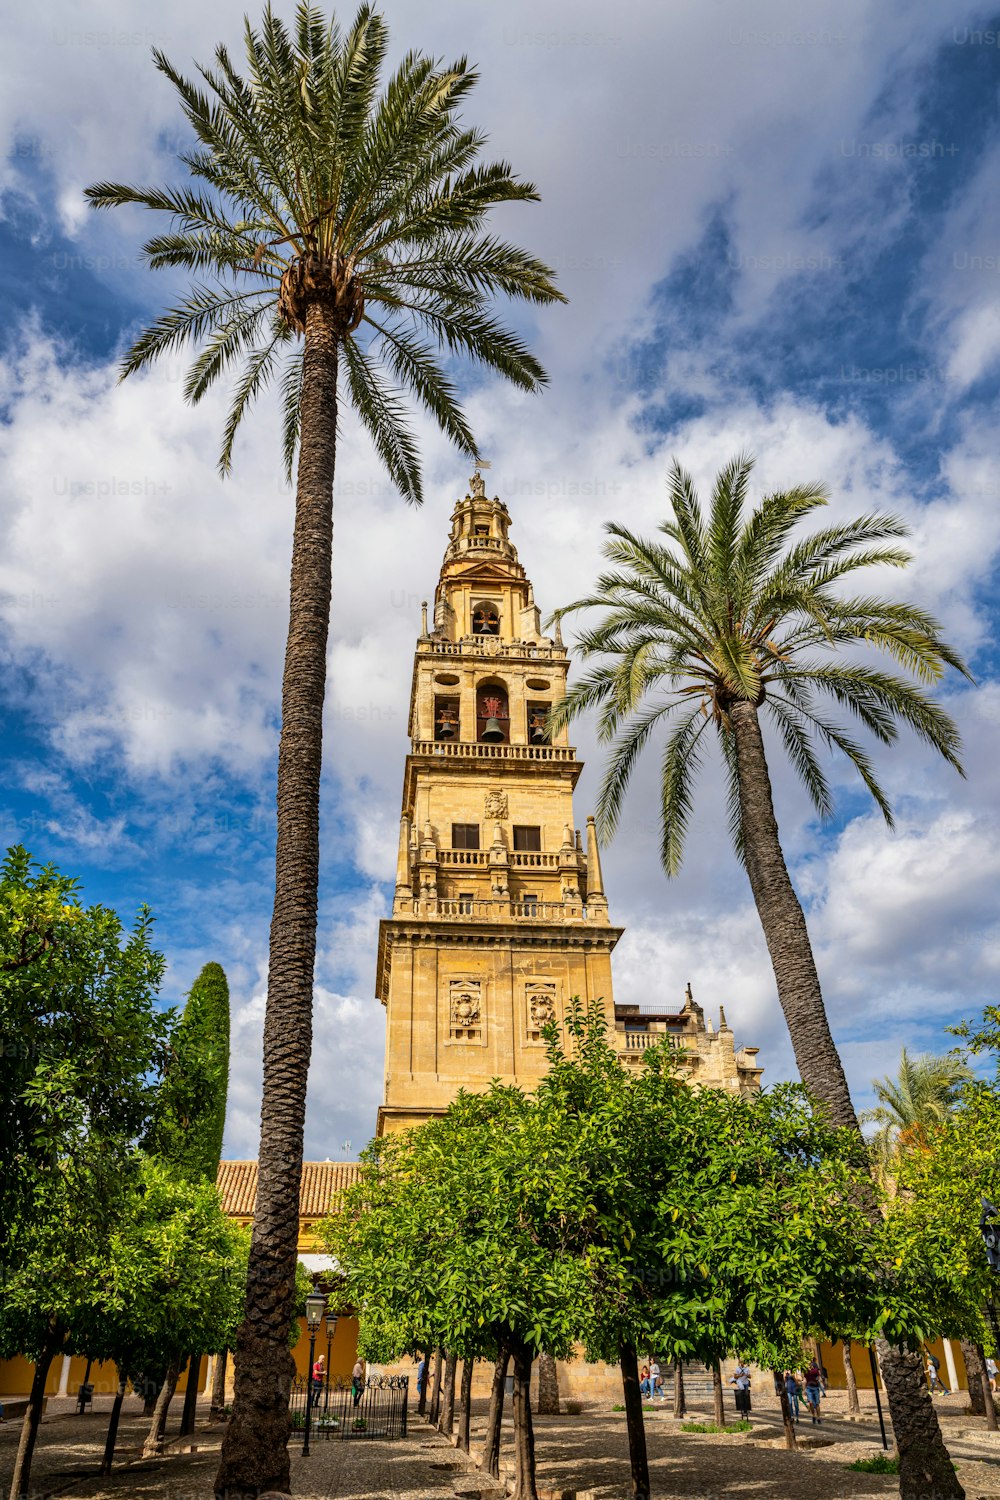 The Bell Tower, Torre Campanario at the Mosque-Cathedral of Cordoba, Spain. A minaret of the Mezquita was converted to the bell tower of the cathedral.